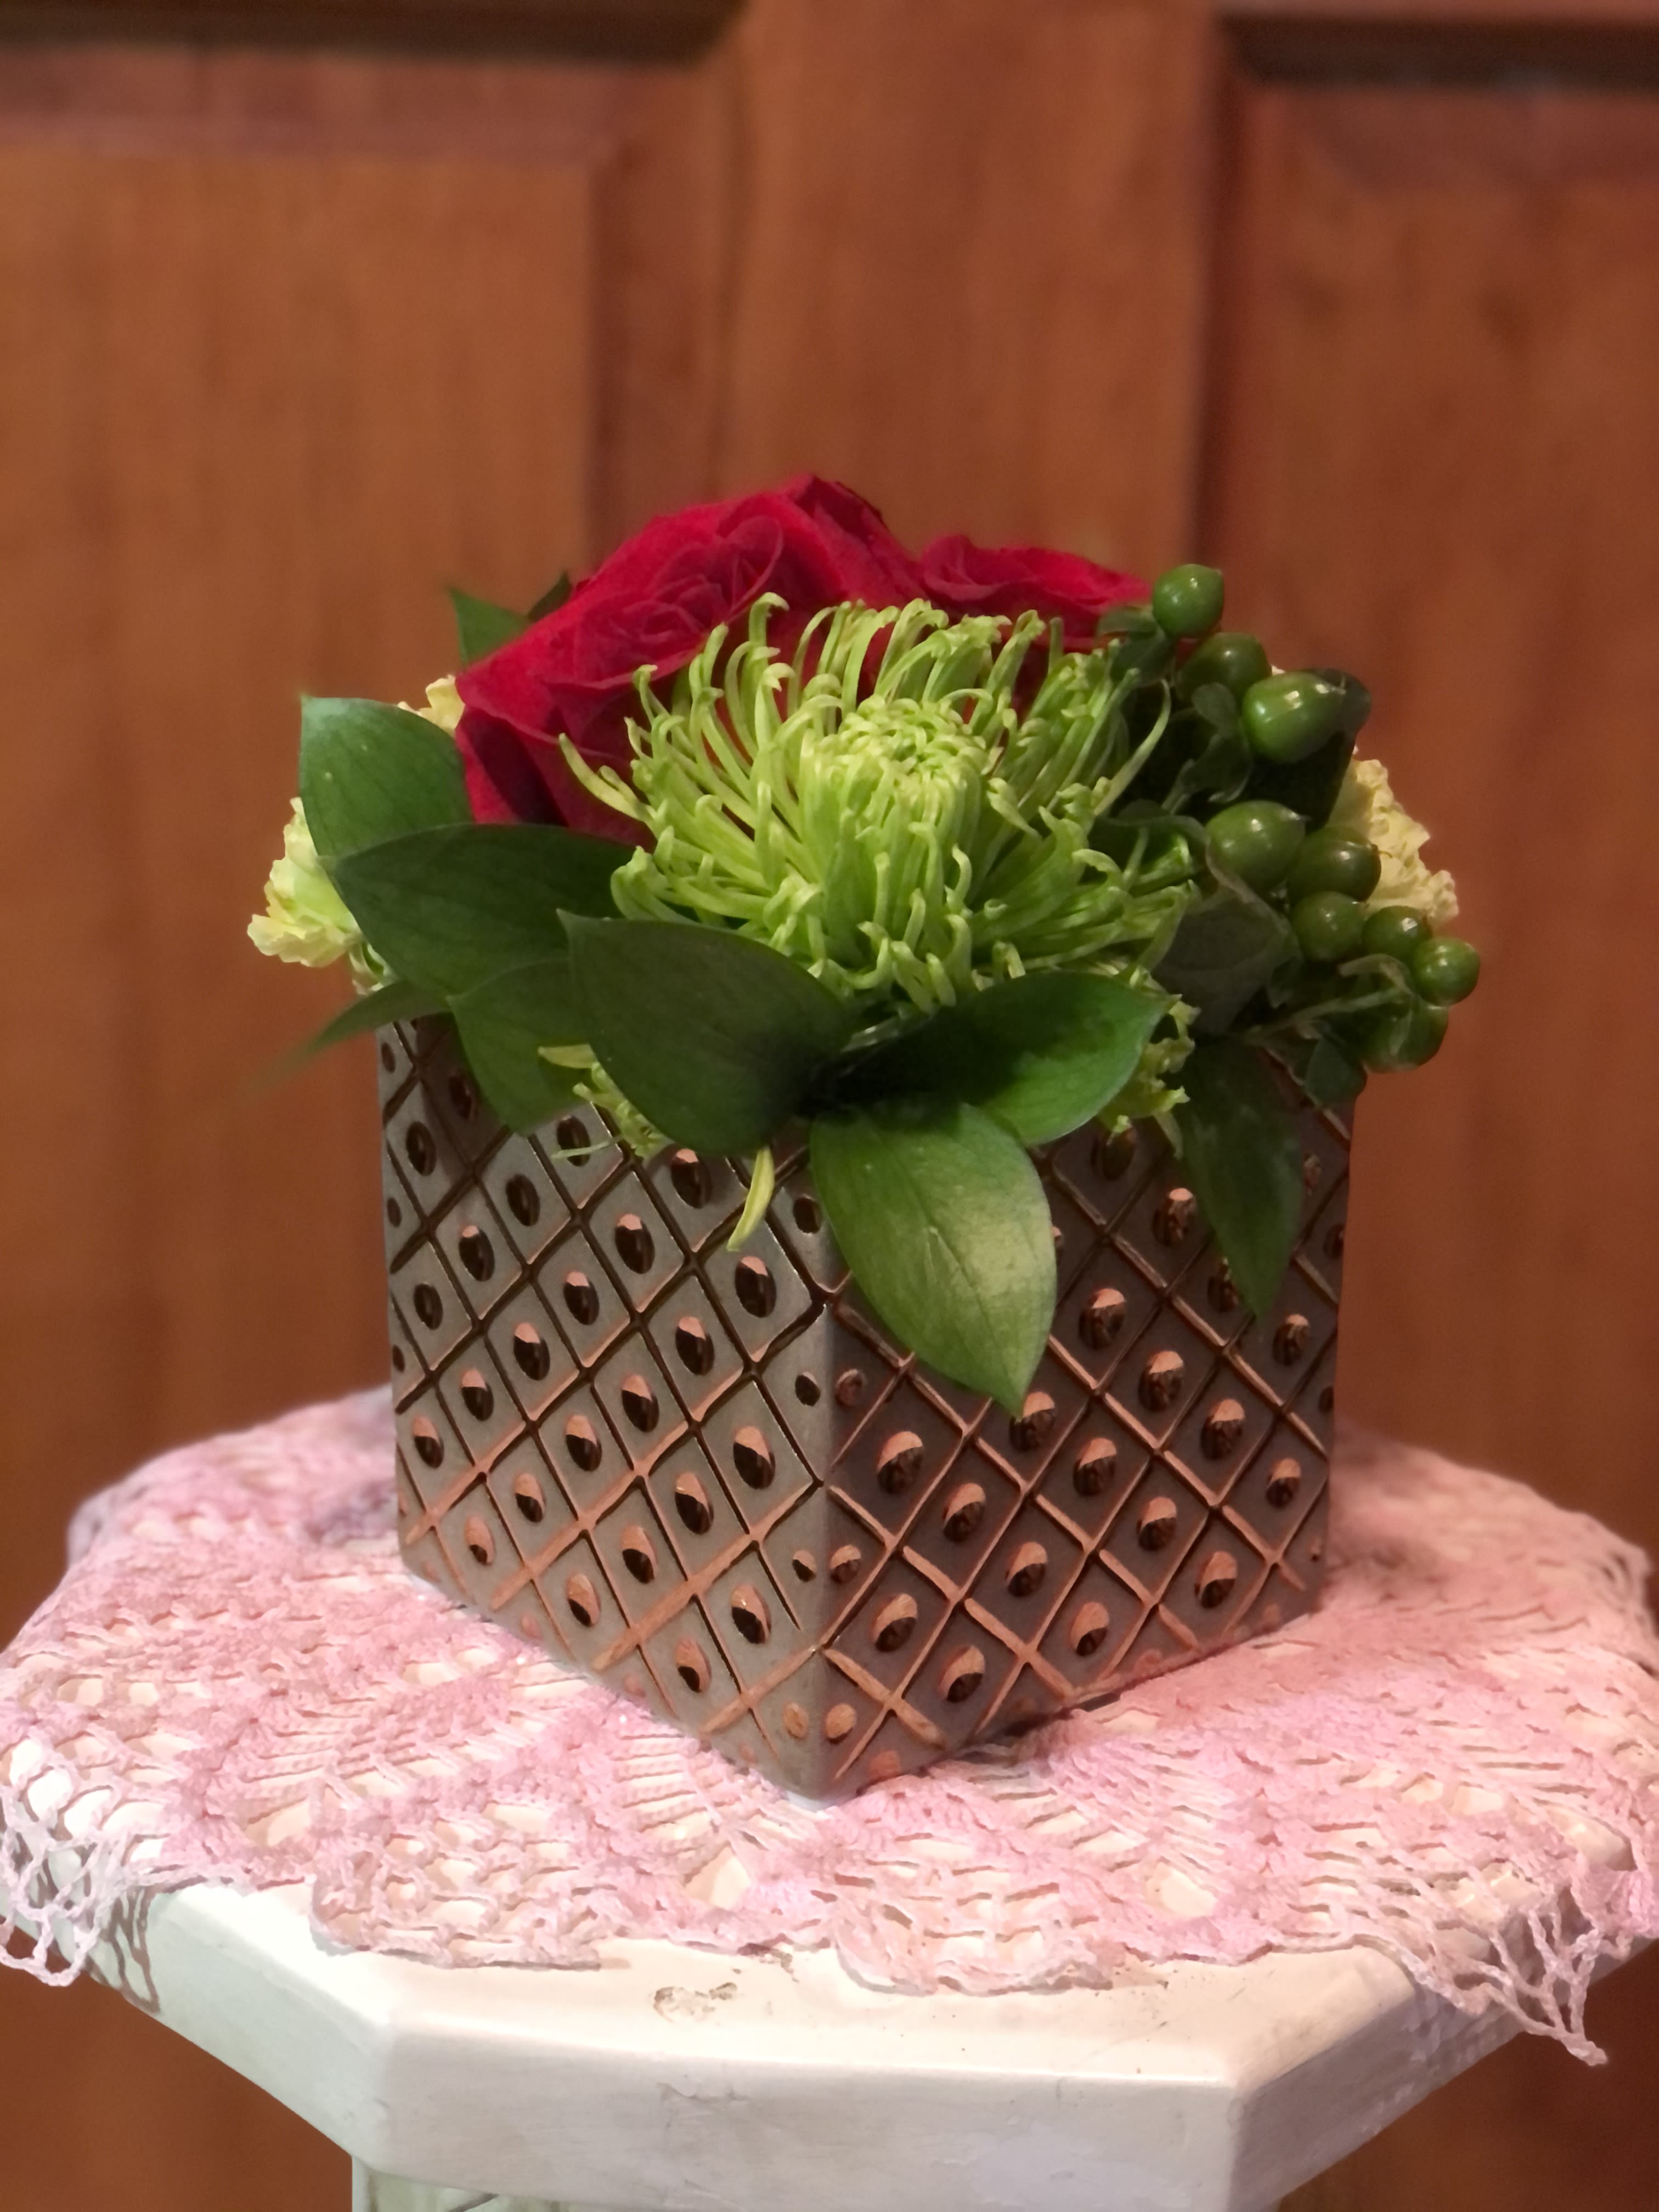 Good as Gold - Good as Gold is a beautiful gold dimpled, textured 4&quot; X 4&quot; ceramic container filled with the freshest flowers of the season. 3 premium red roses, 1 Fiji mum, 2 carnations, 1 green trick dianthus with hypericum berries and assorted greenery. Inventory count: 4